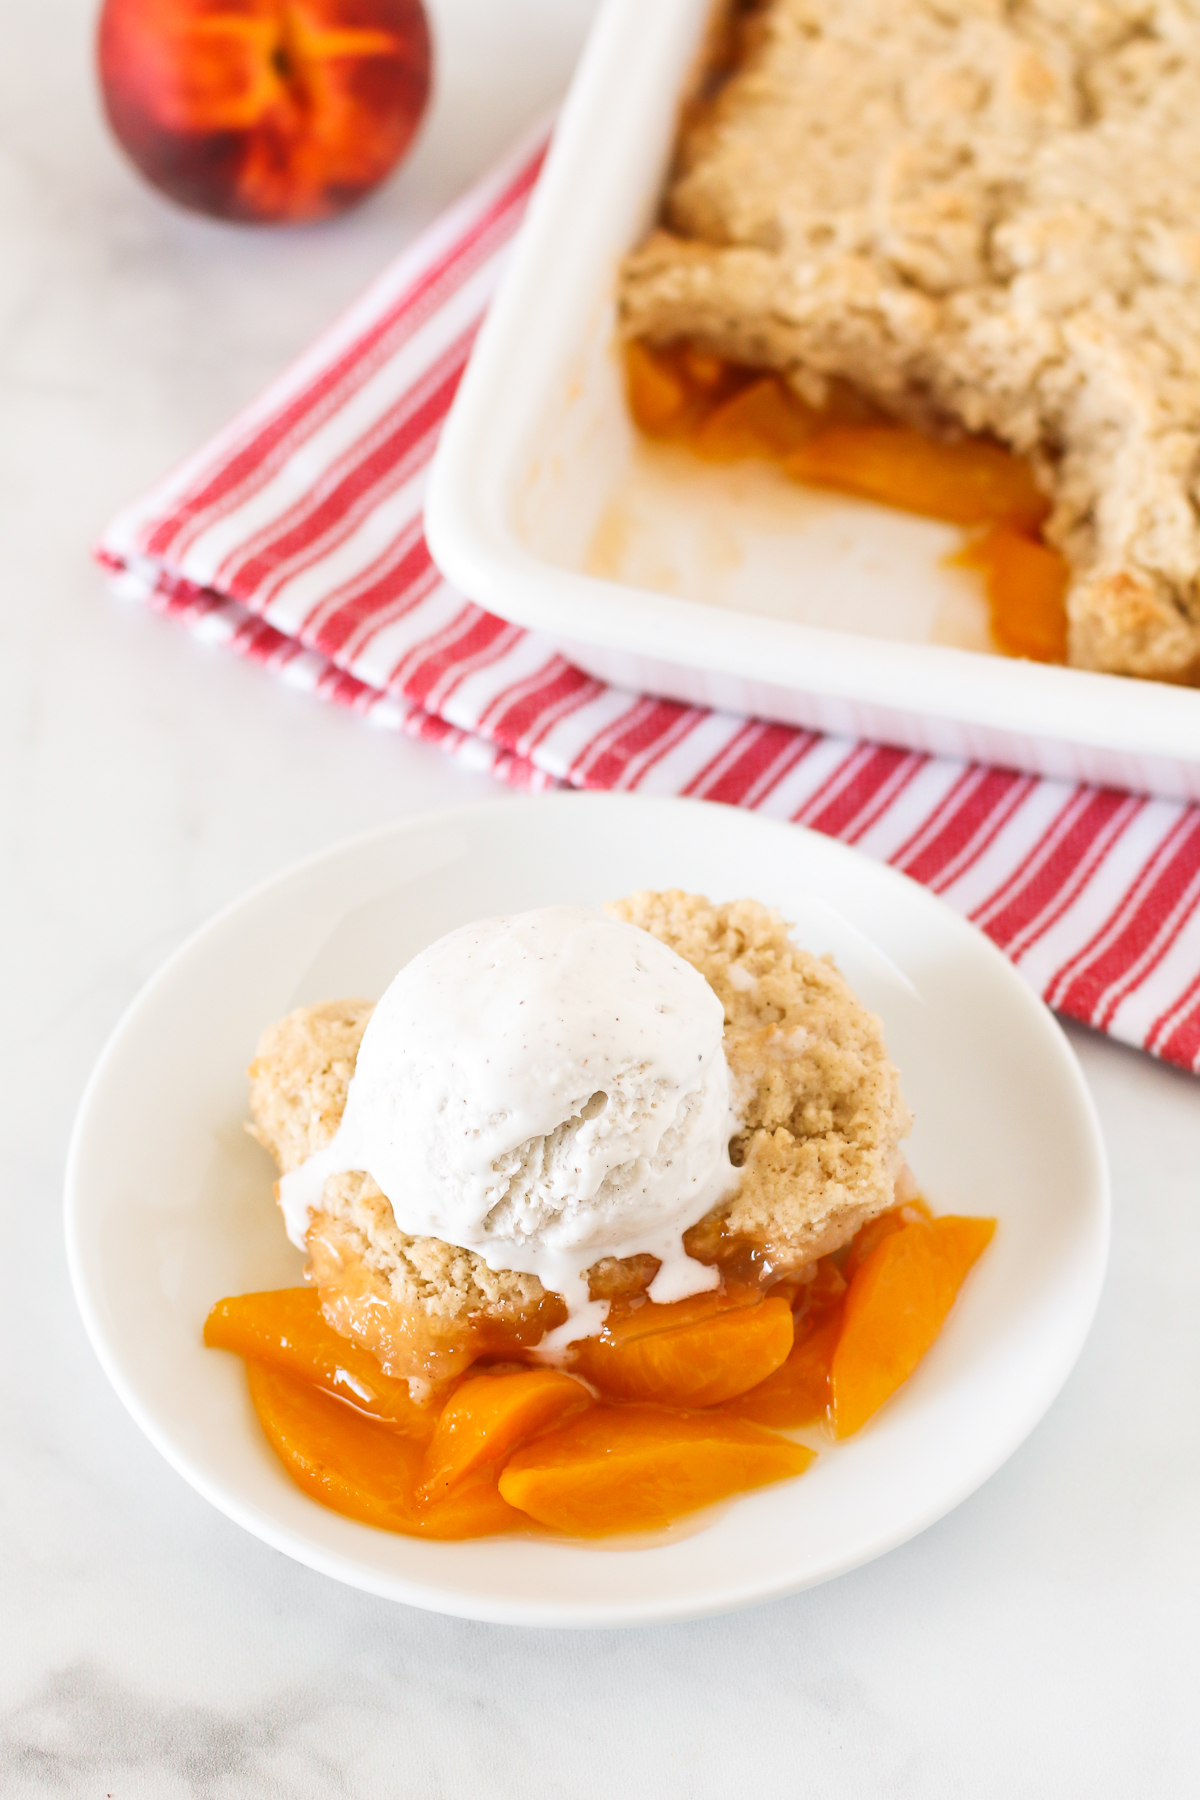 Gluten Free Vegan Peach Cobbler. Perfectly golden biscuit-like topping over sweet, juicy fresh peaches. A summertime must! 